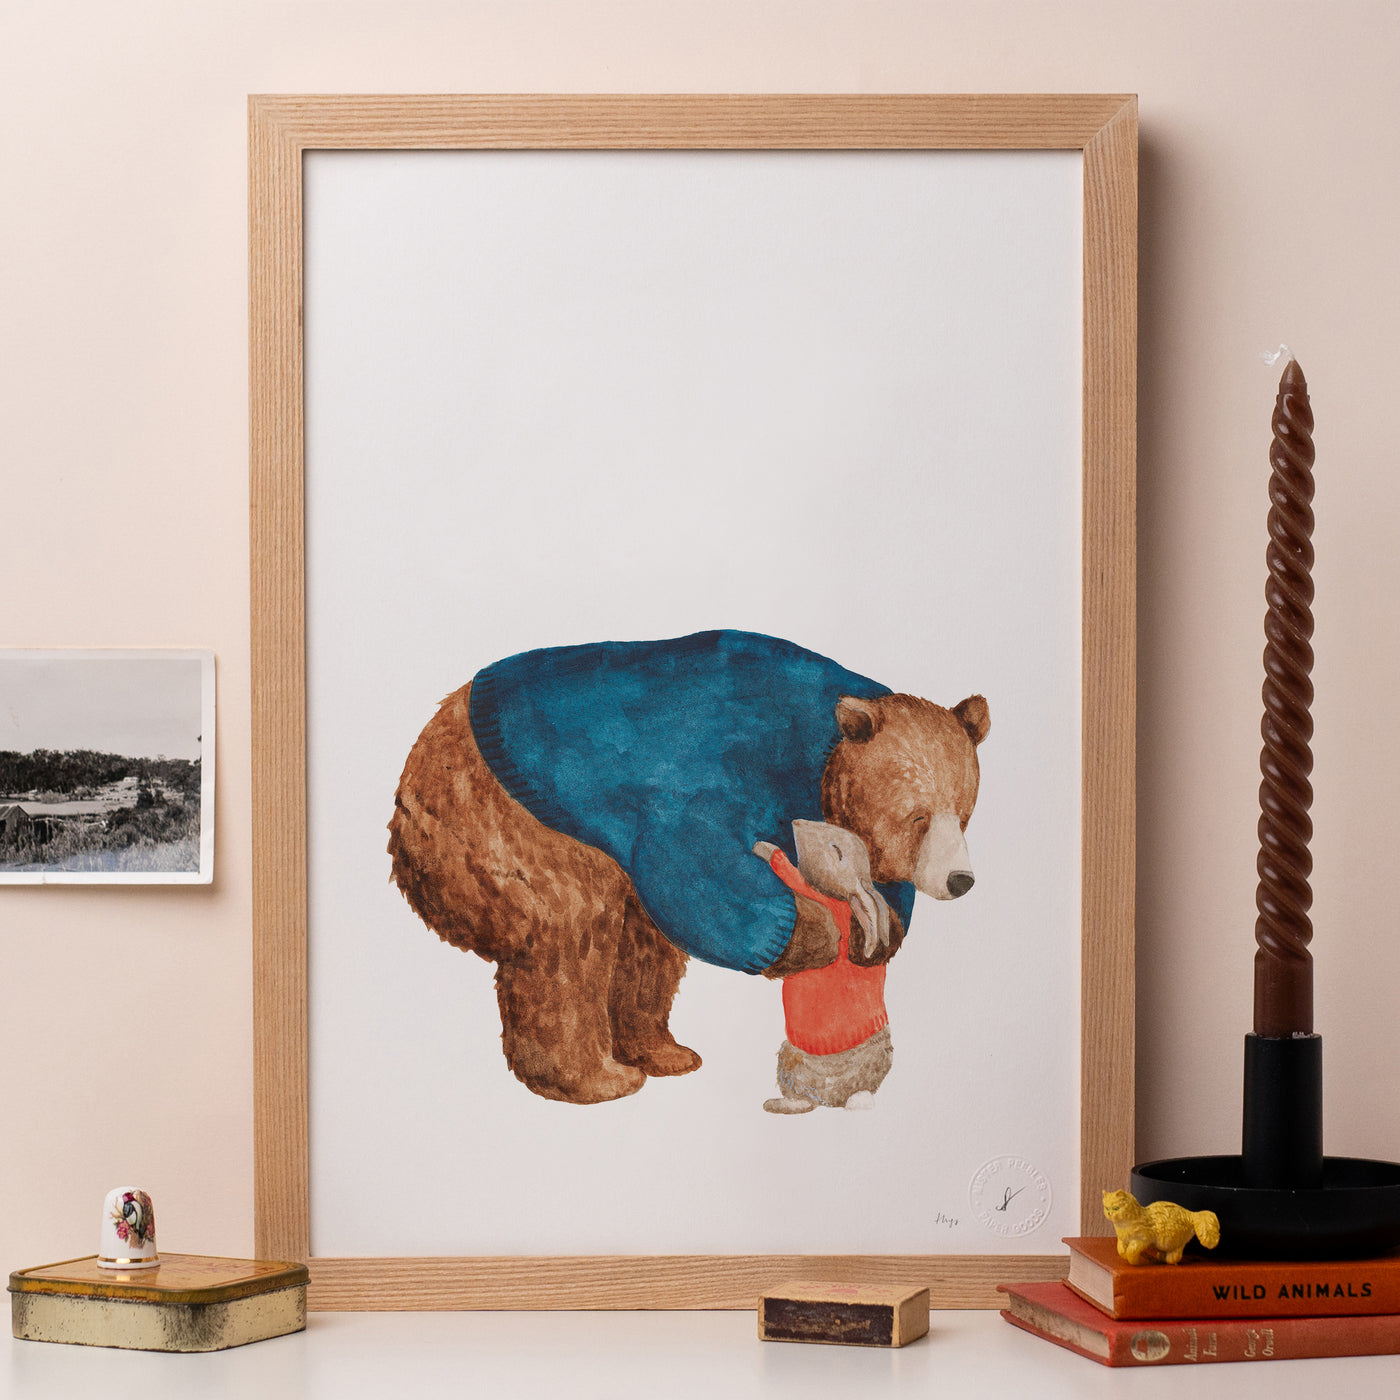 A framed print of a drawing of a brown bear hugging a rabbit.